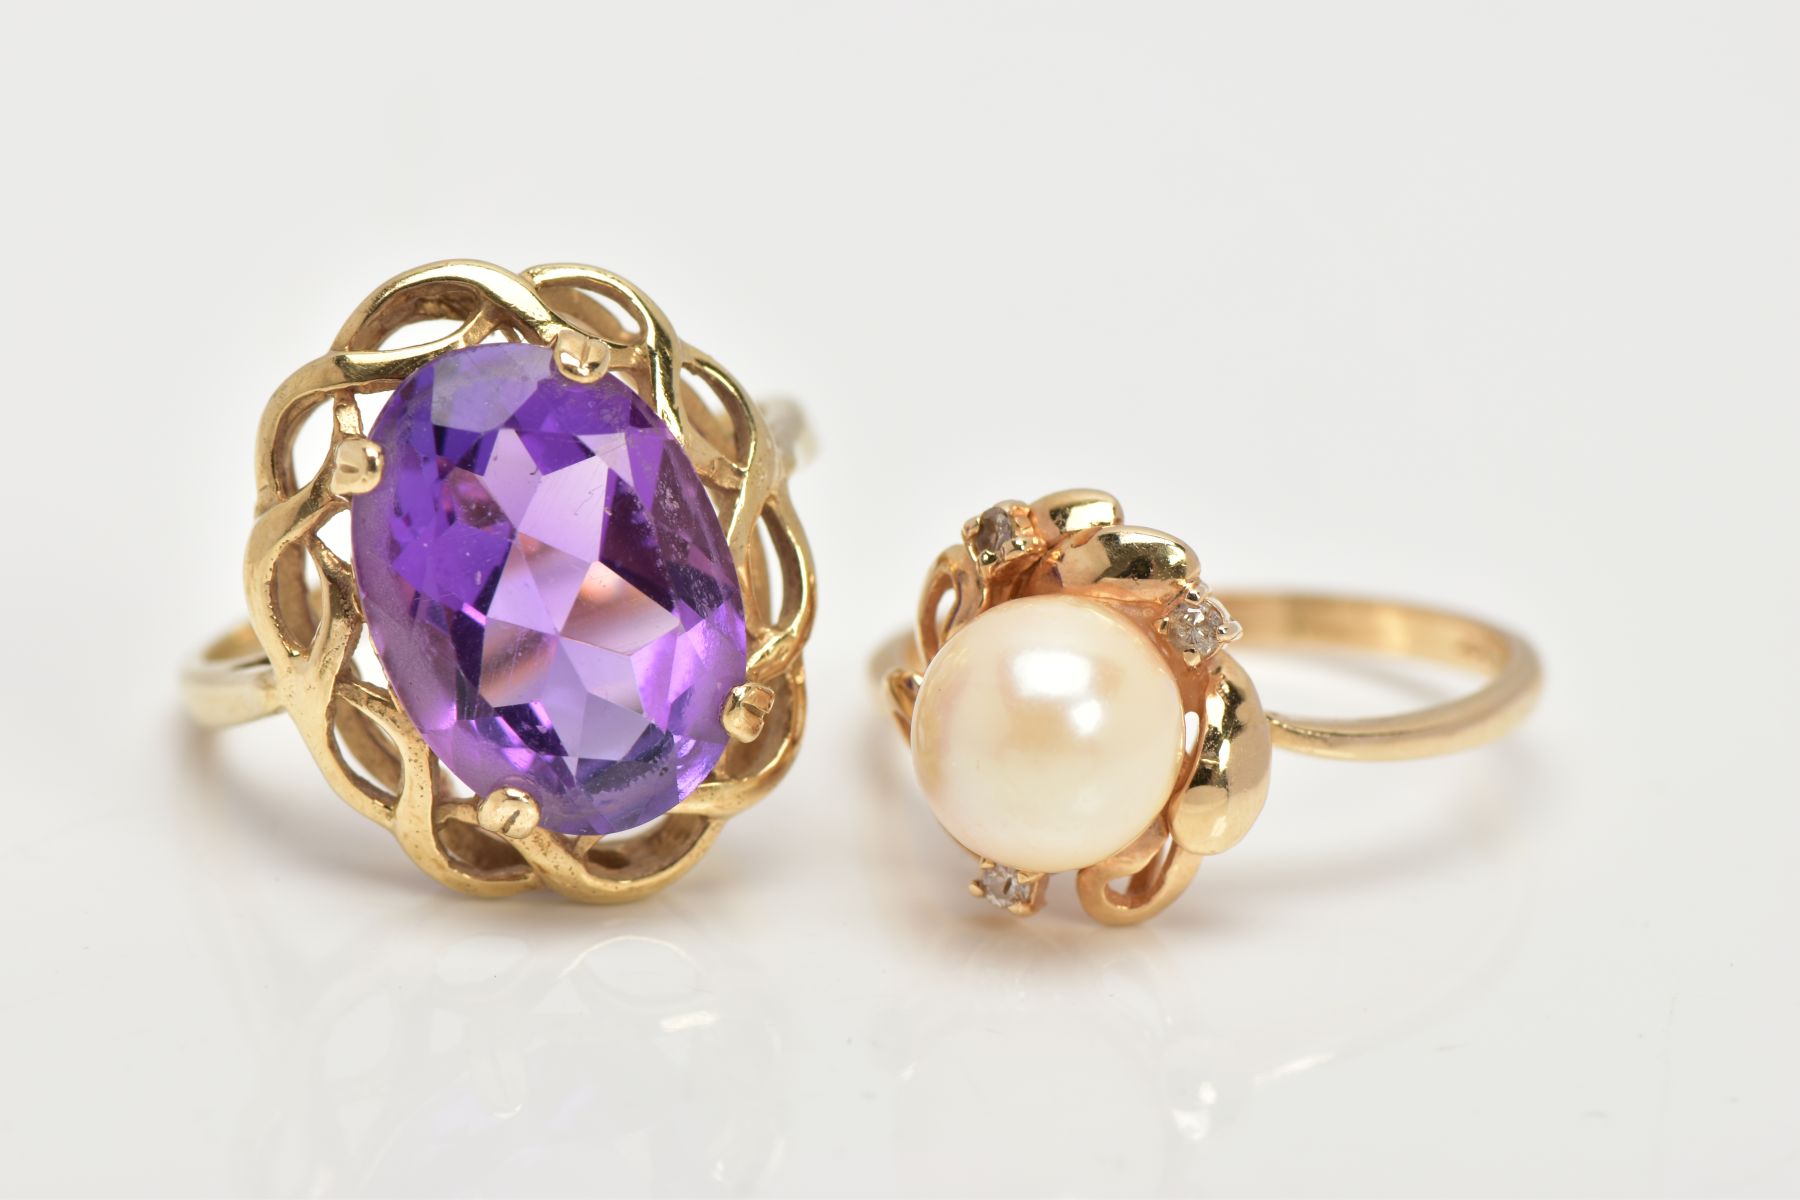 A 9CT GOLD AMETHYST RING AND A CULTURED PEARL RING, the first designed with a four claw set, oval